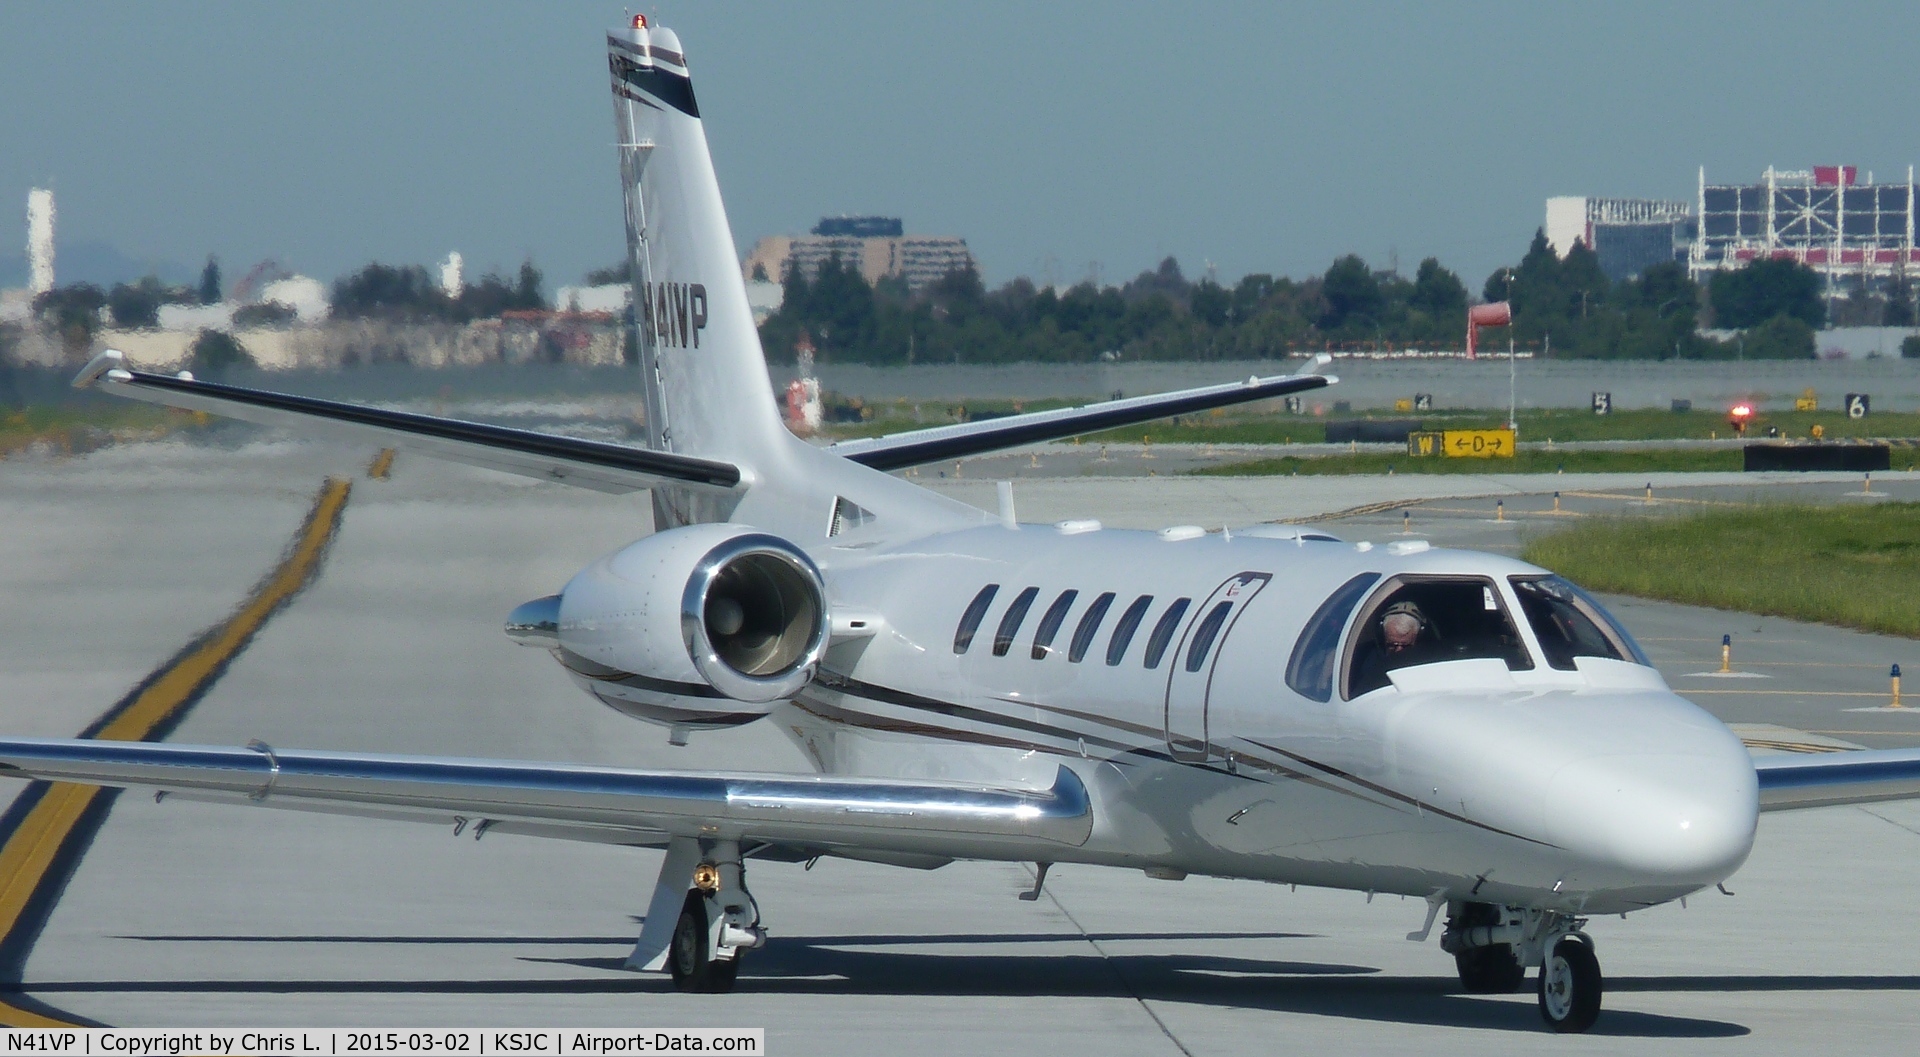 N41VP, 2002 Cessna 560 Citation Encore C/N 560-0626, A Cessna Citation 560, based out of Hayward, gets ready for departure on runway 30L at San Jose.